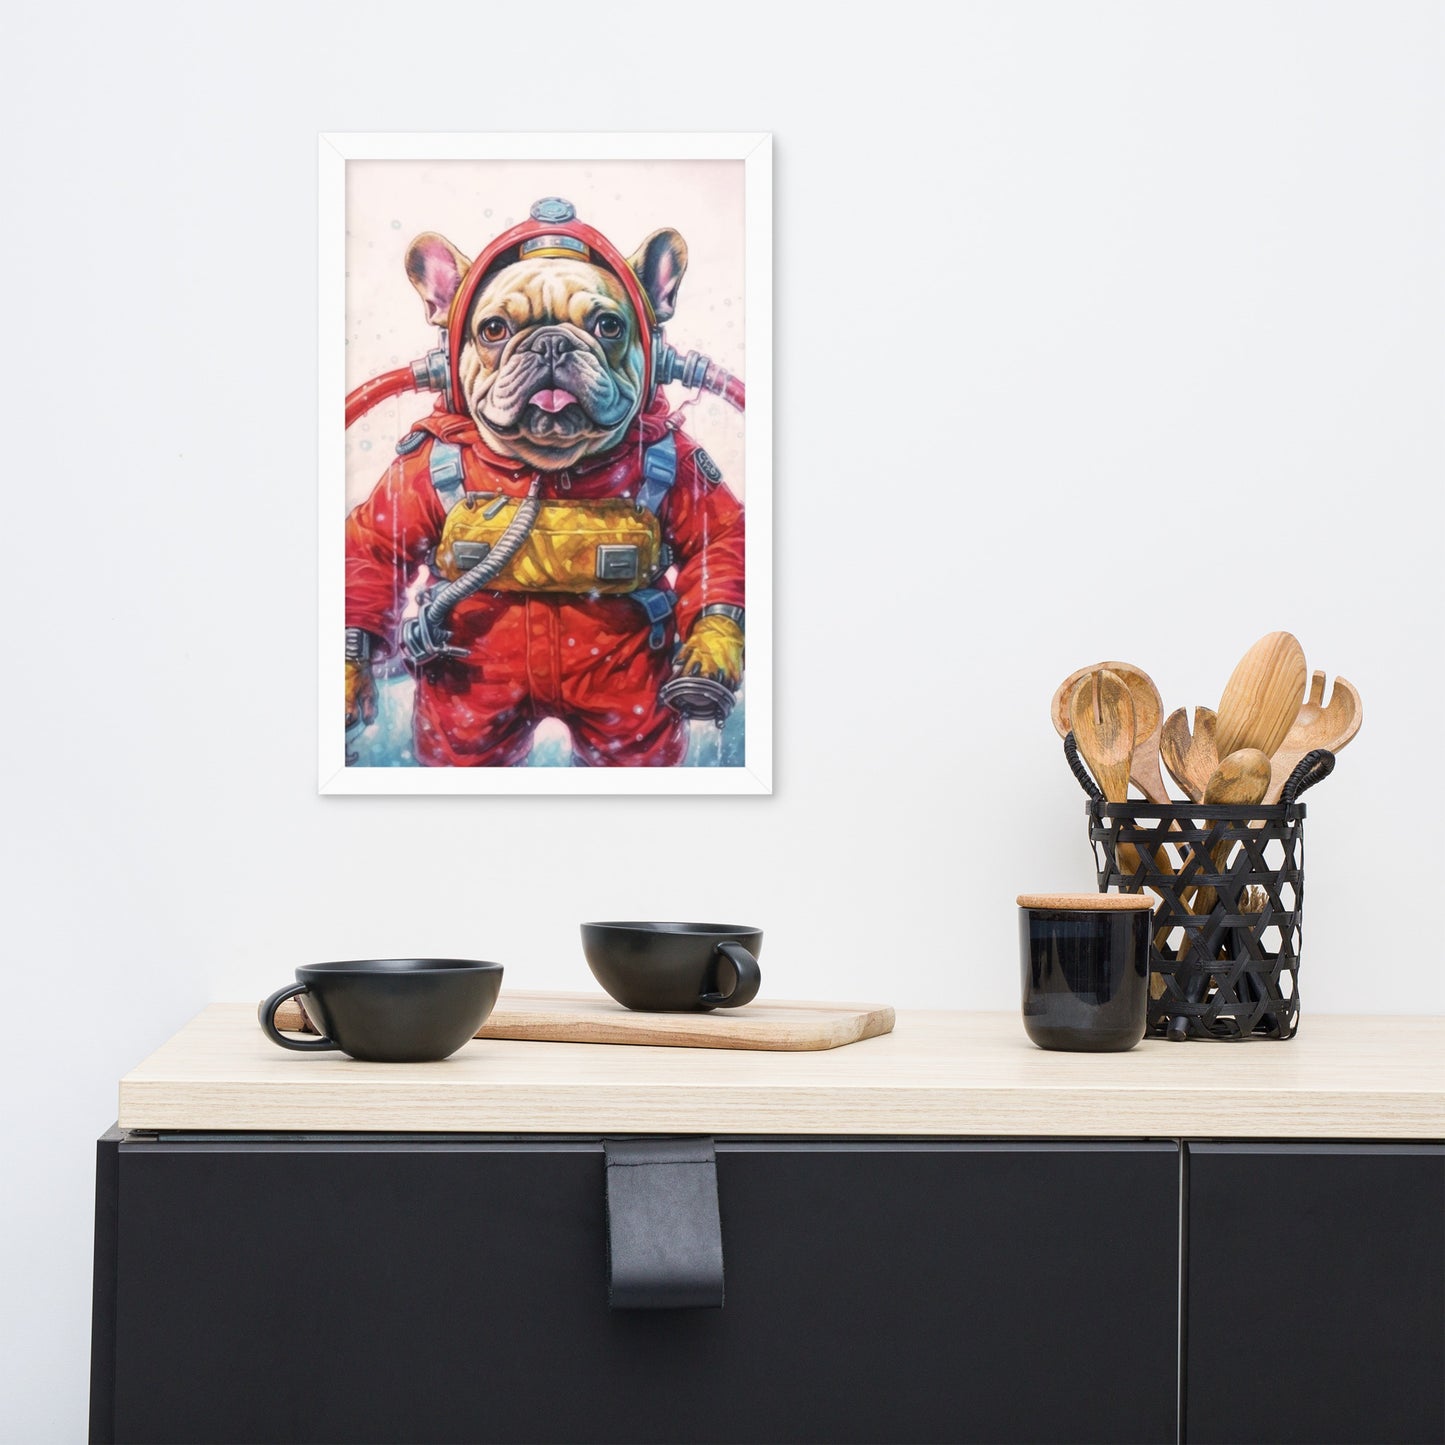 Firefighter Frenchie Framed Poster - A Courageous and Artistic Choice for Pet Lovers and Fire Service Admirers